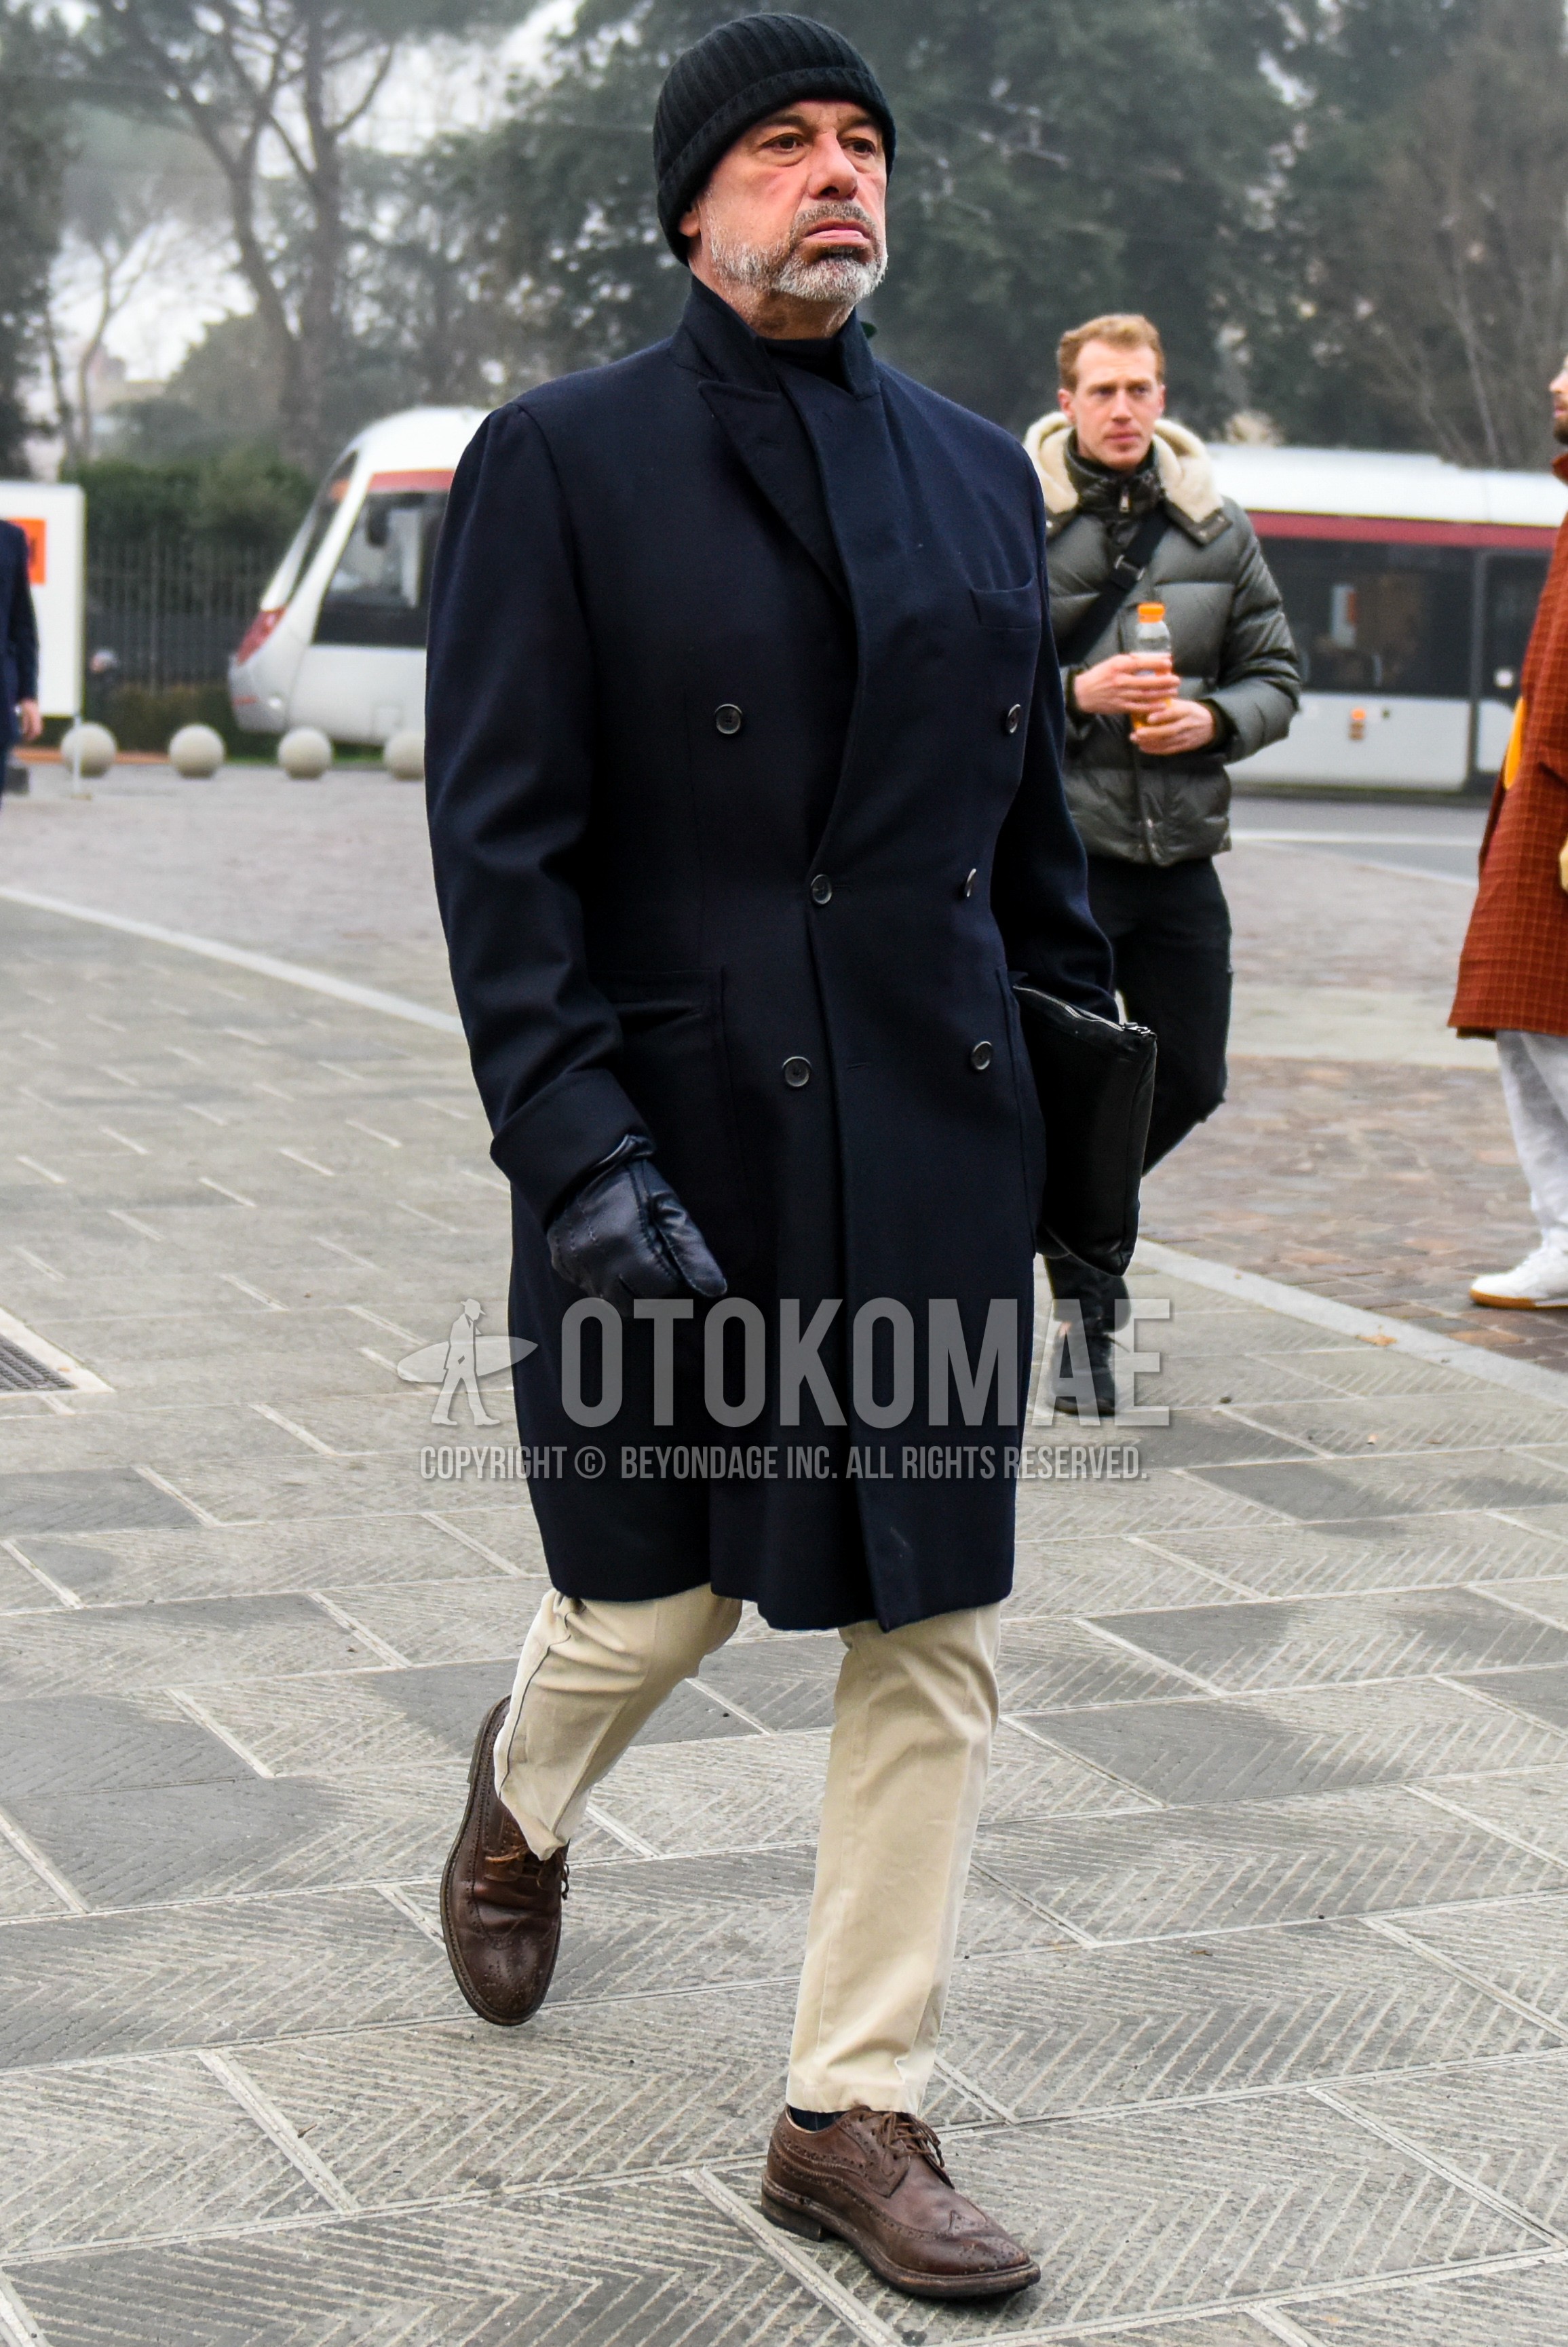 Men's autumn winter outfit with black plain knit cap, navy plain chester coat, beige plain chinos, brown wing-tip shoes leather shoes.